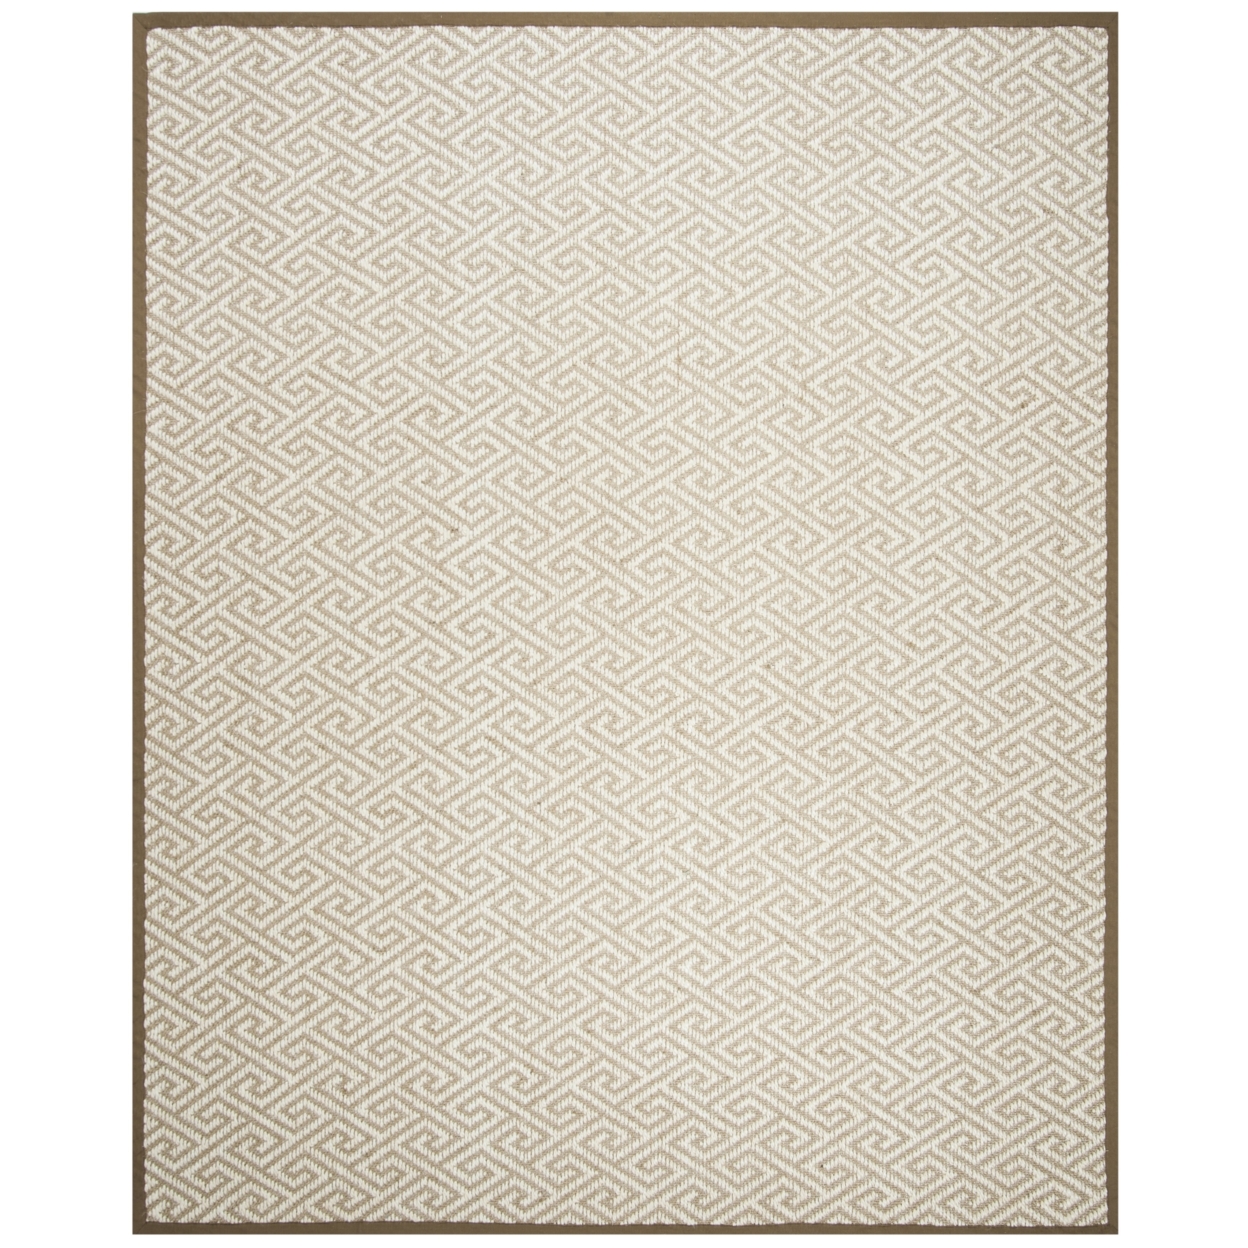 SAFAVIEH Natural Fiber Collection NF462A Natural Rug - 6' Square